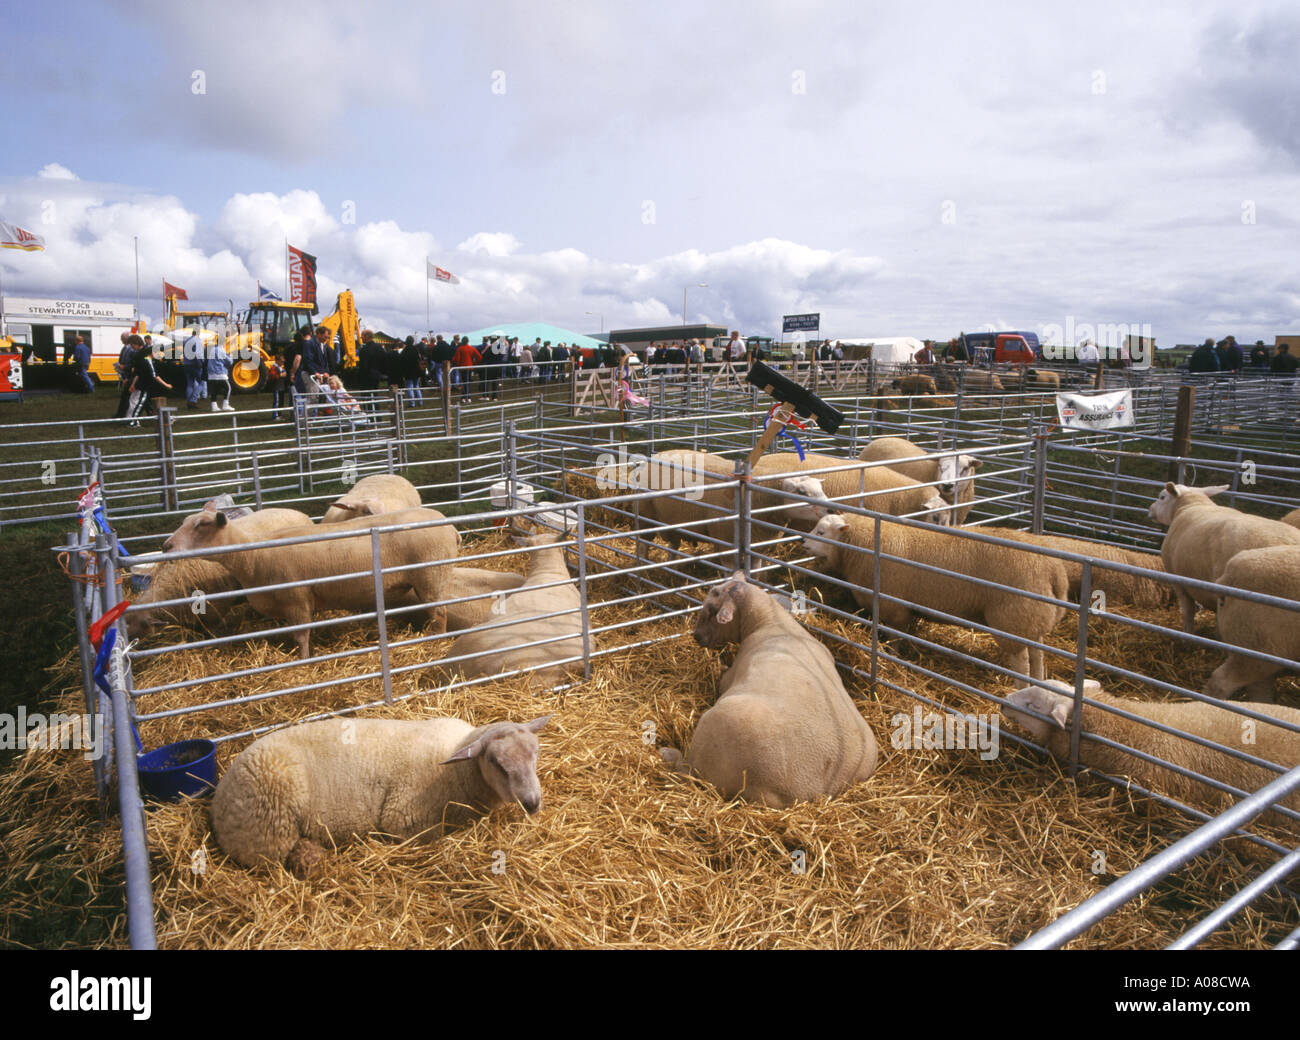 dh County show KIRKWALL ORKNEY Charollais sheep flock animal livestock pens animals pen uk agricultural Stock Photo